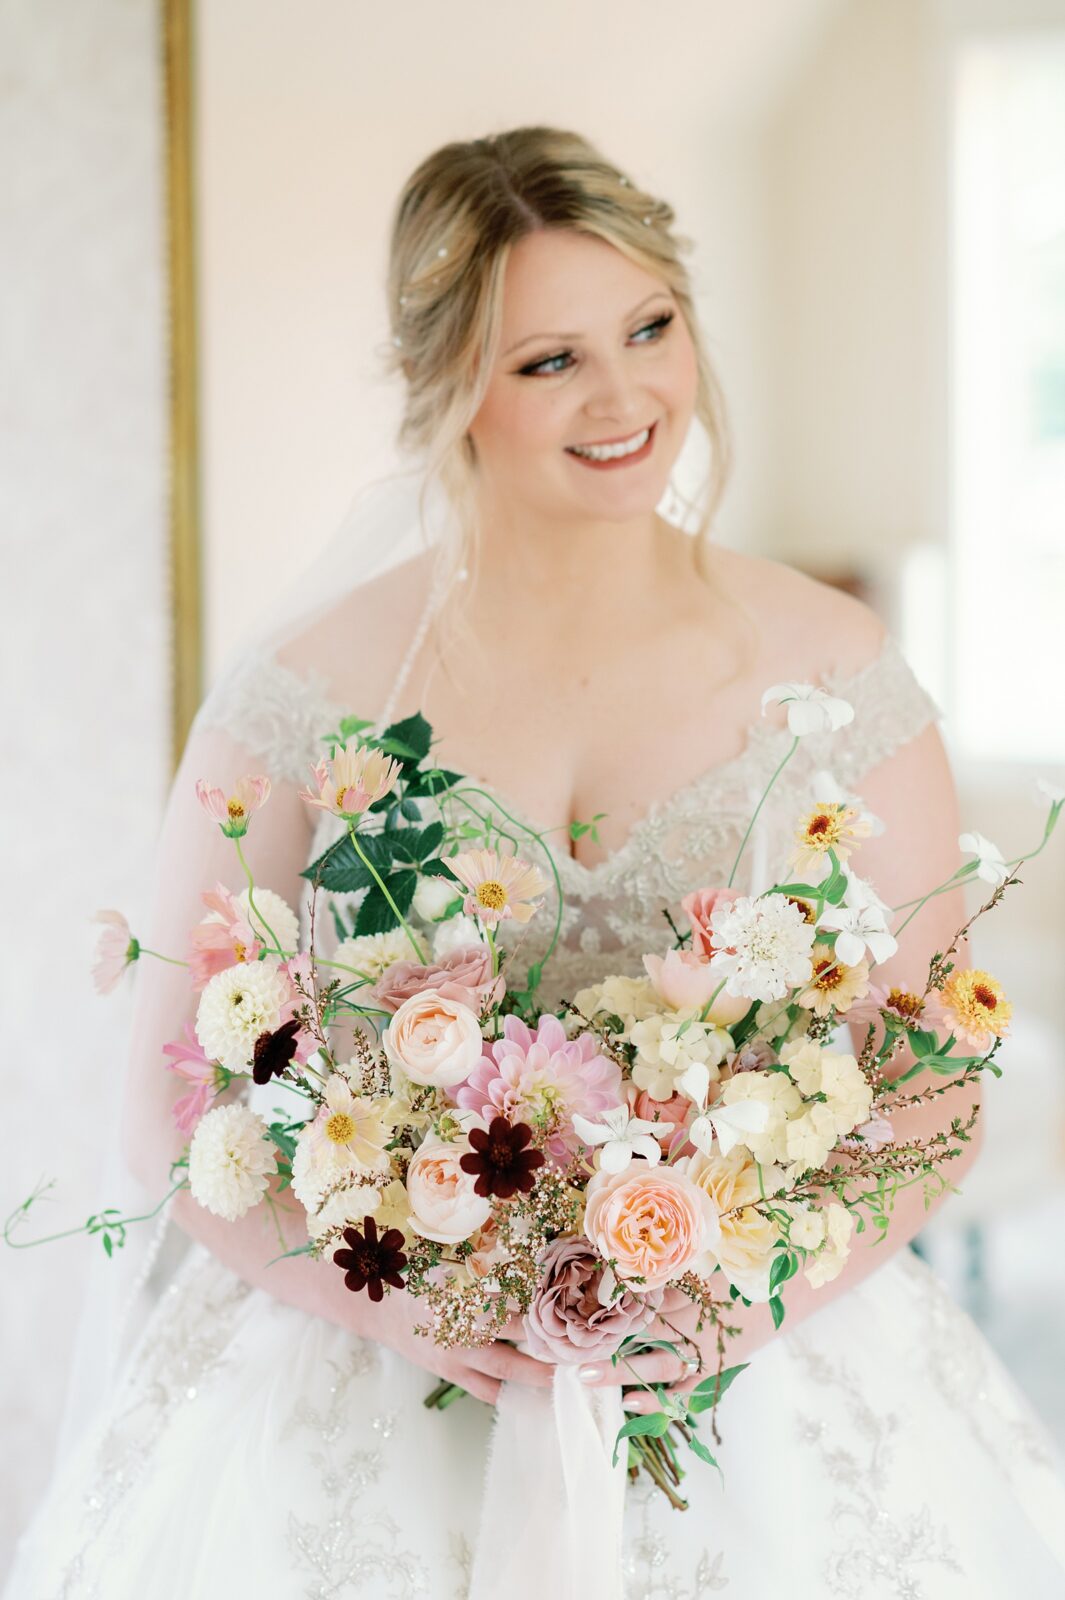 Bride smiling as she looks out the window at Venue 3Two in Grand Rapids, MI. Her bouquet is the focal point of the image, and is whimsical with spring colors.